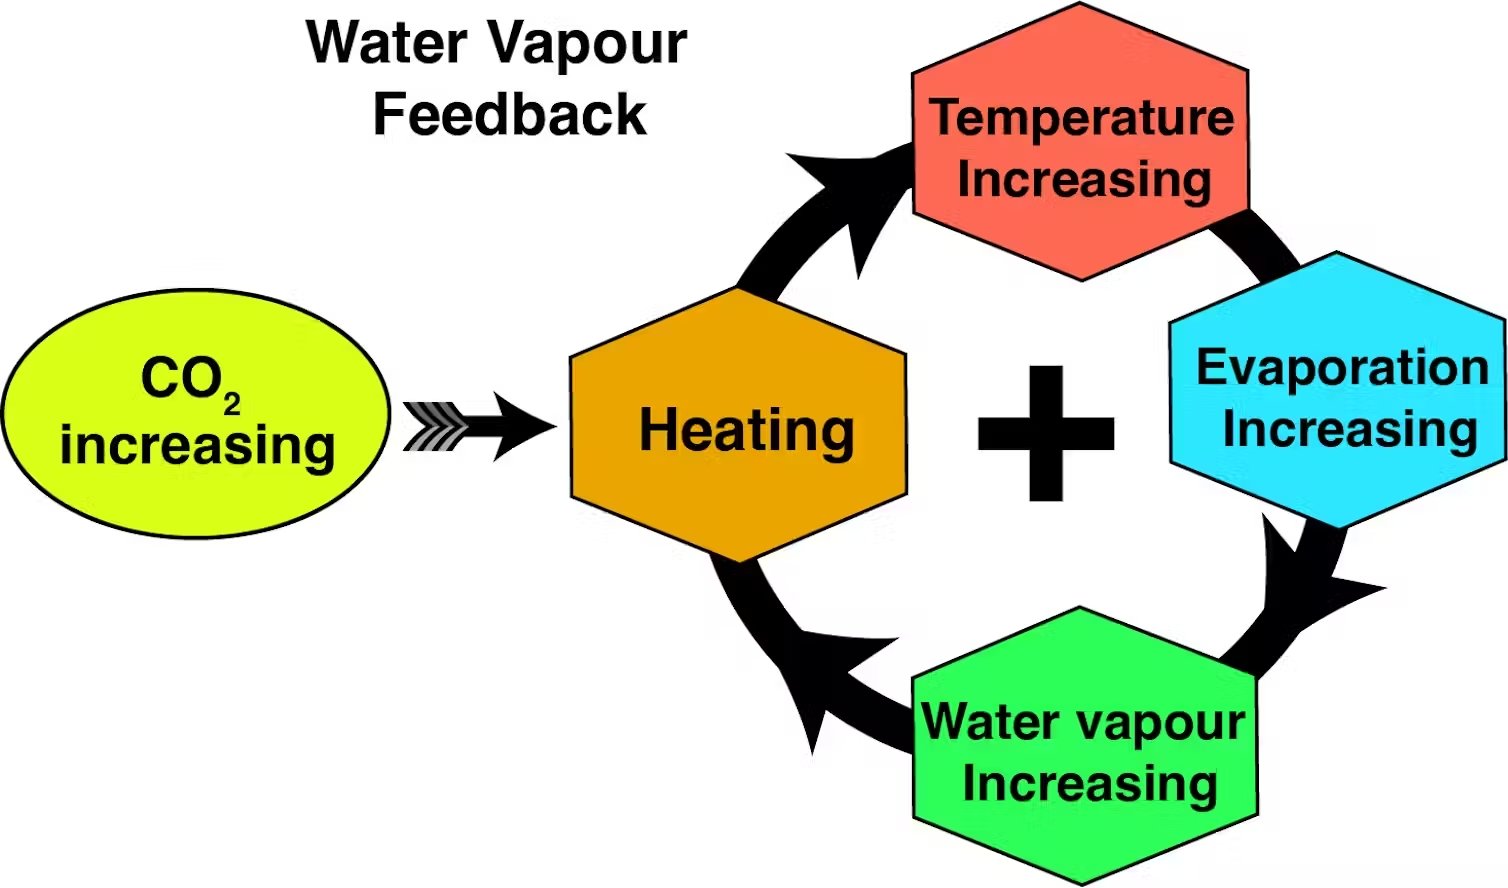 The water vapour feedback